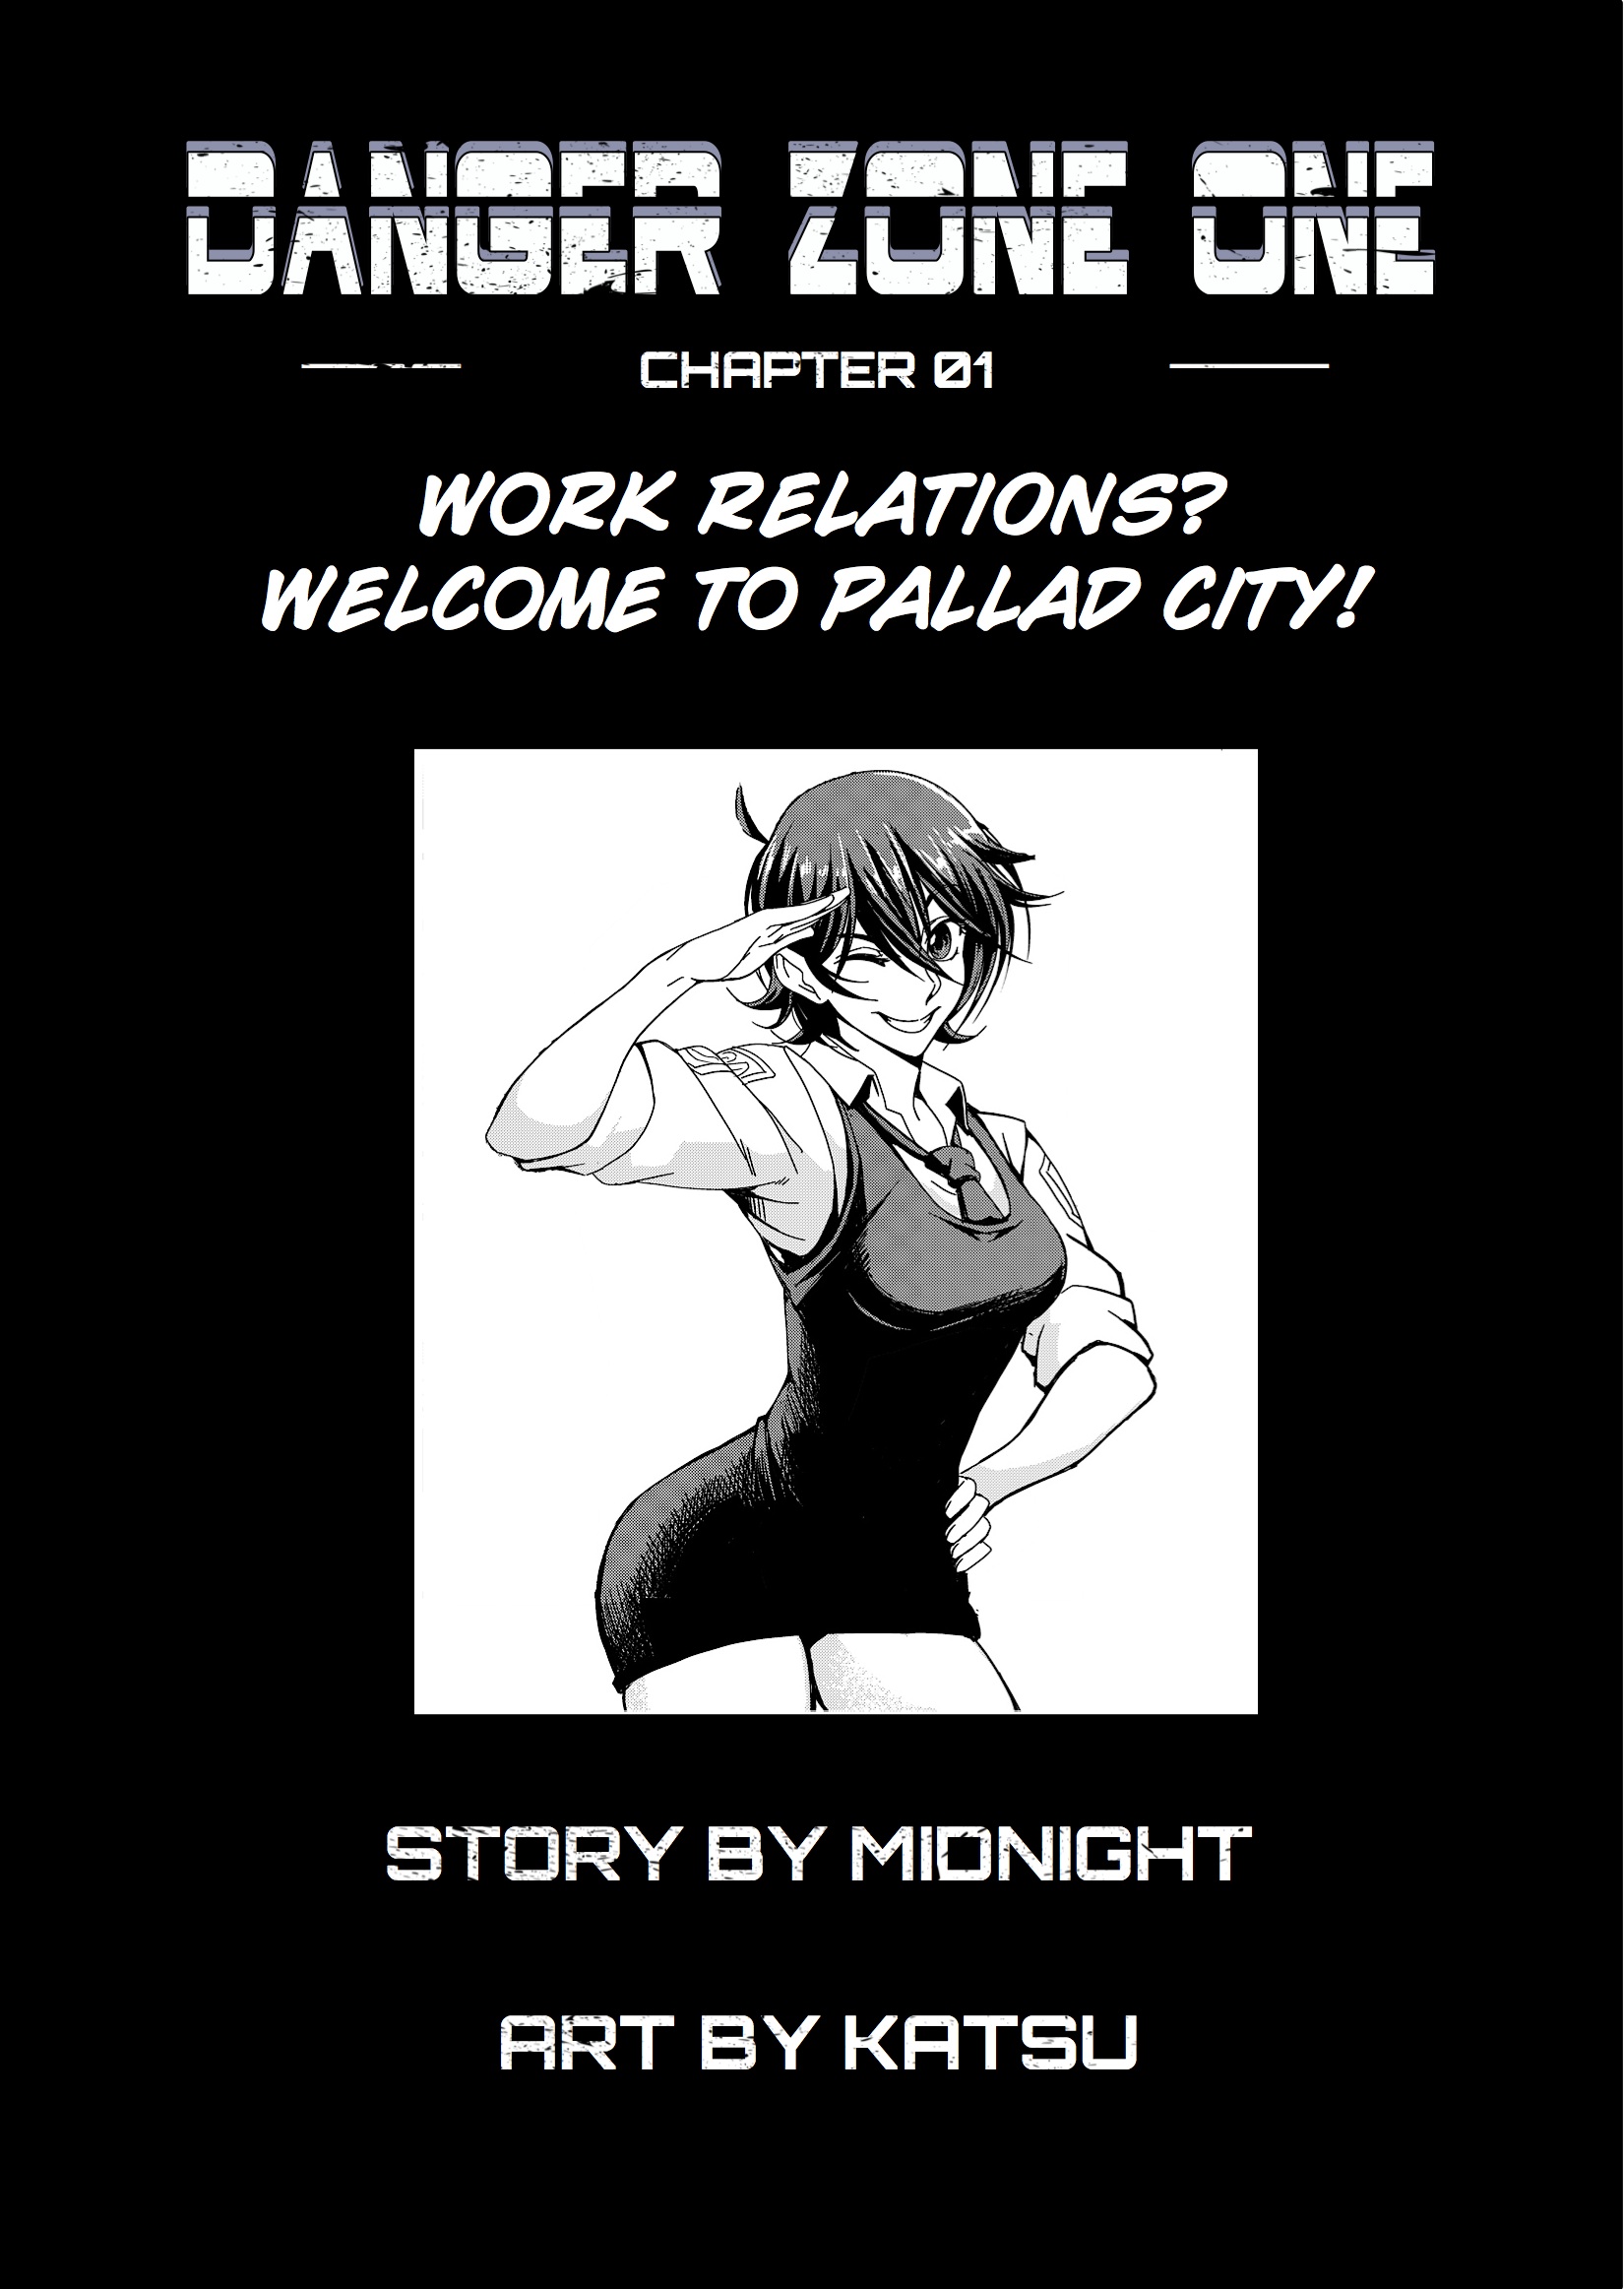 Chapter 1: Welcome to Pallad City